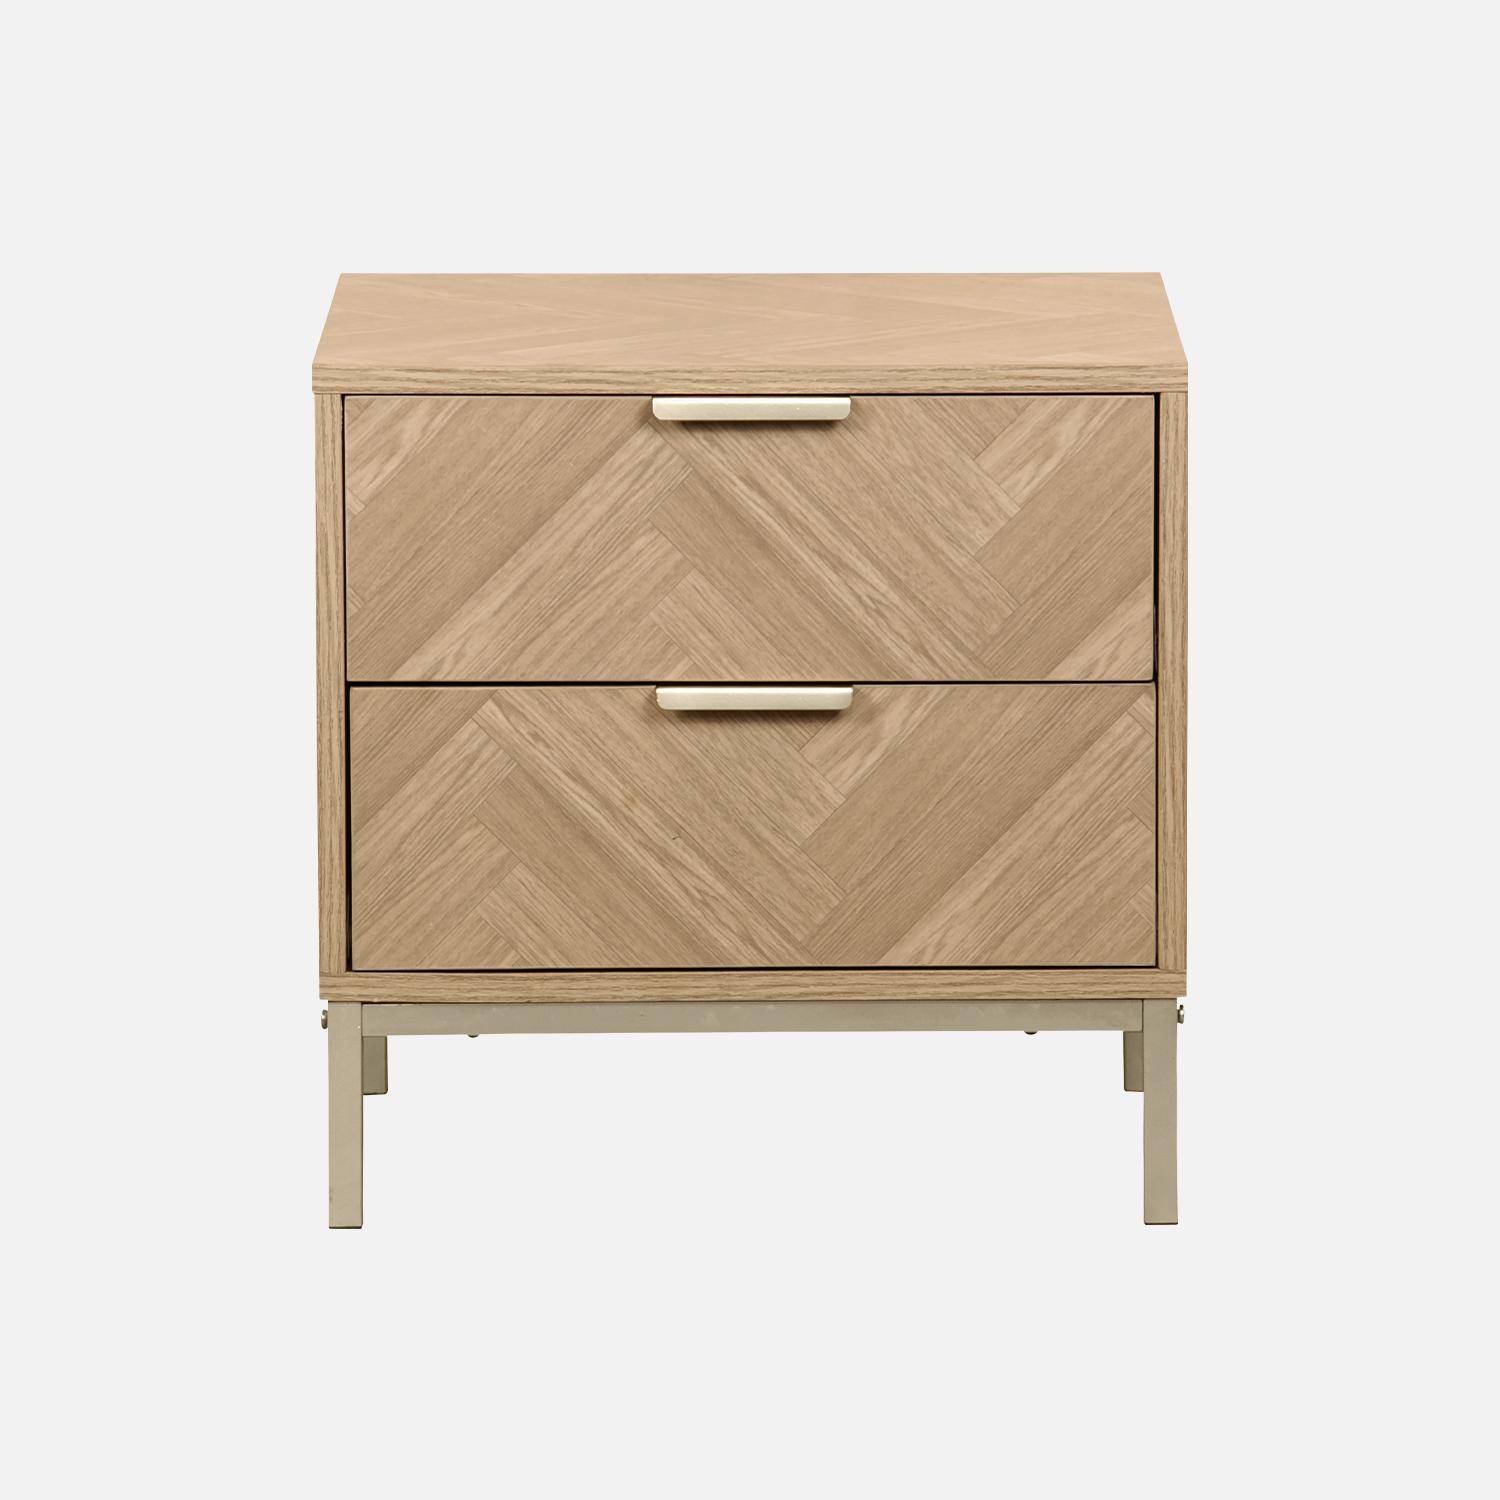 Pair of  contemporary Herringbone bedside table with 2 drawers Photo4